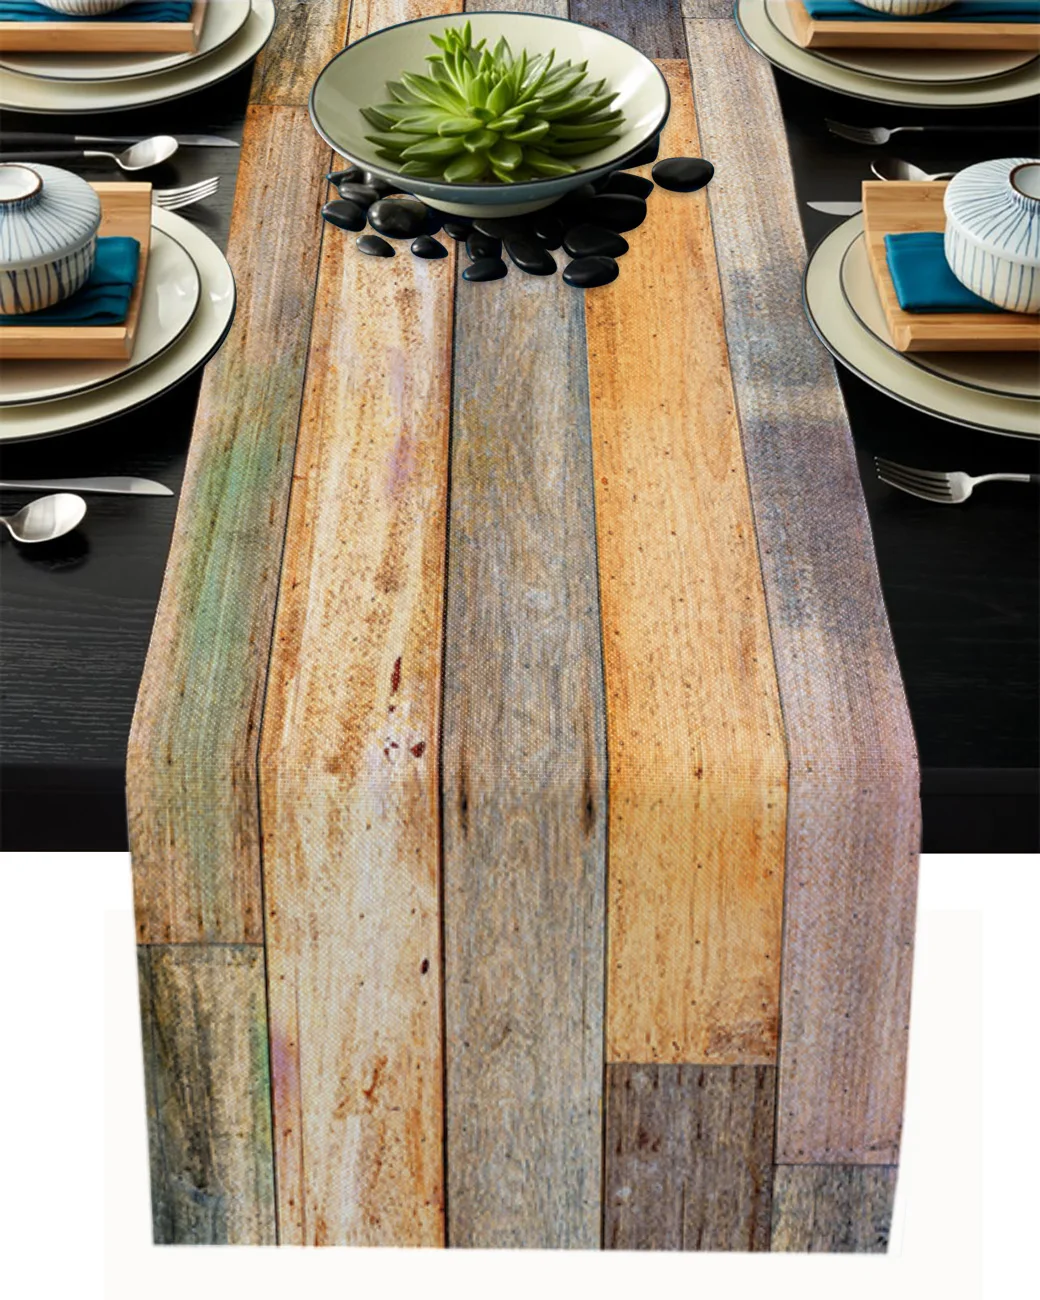 

Vintage Wood Texture Table Runner Wedding Holiday Party Dining Table Cover Cloth Placemat Napkin Home Kitchen Rustic Decoration